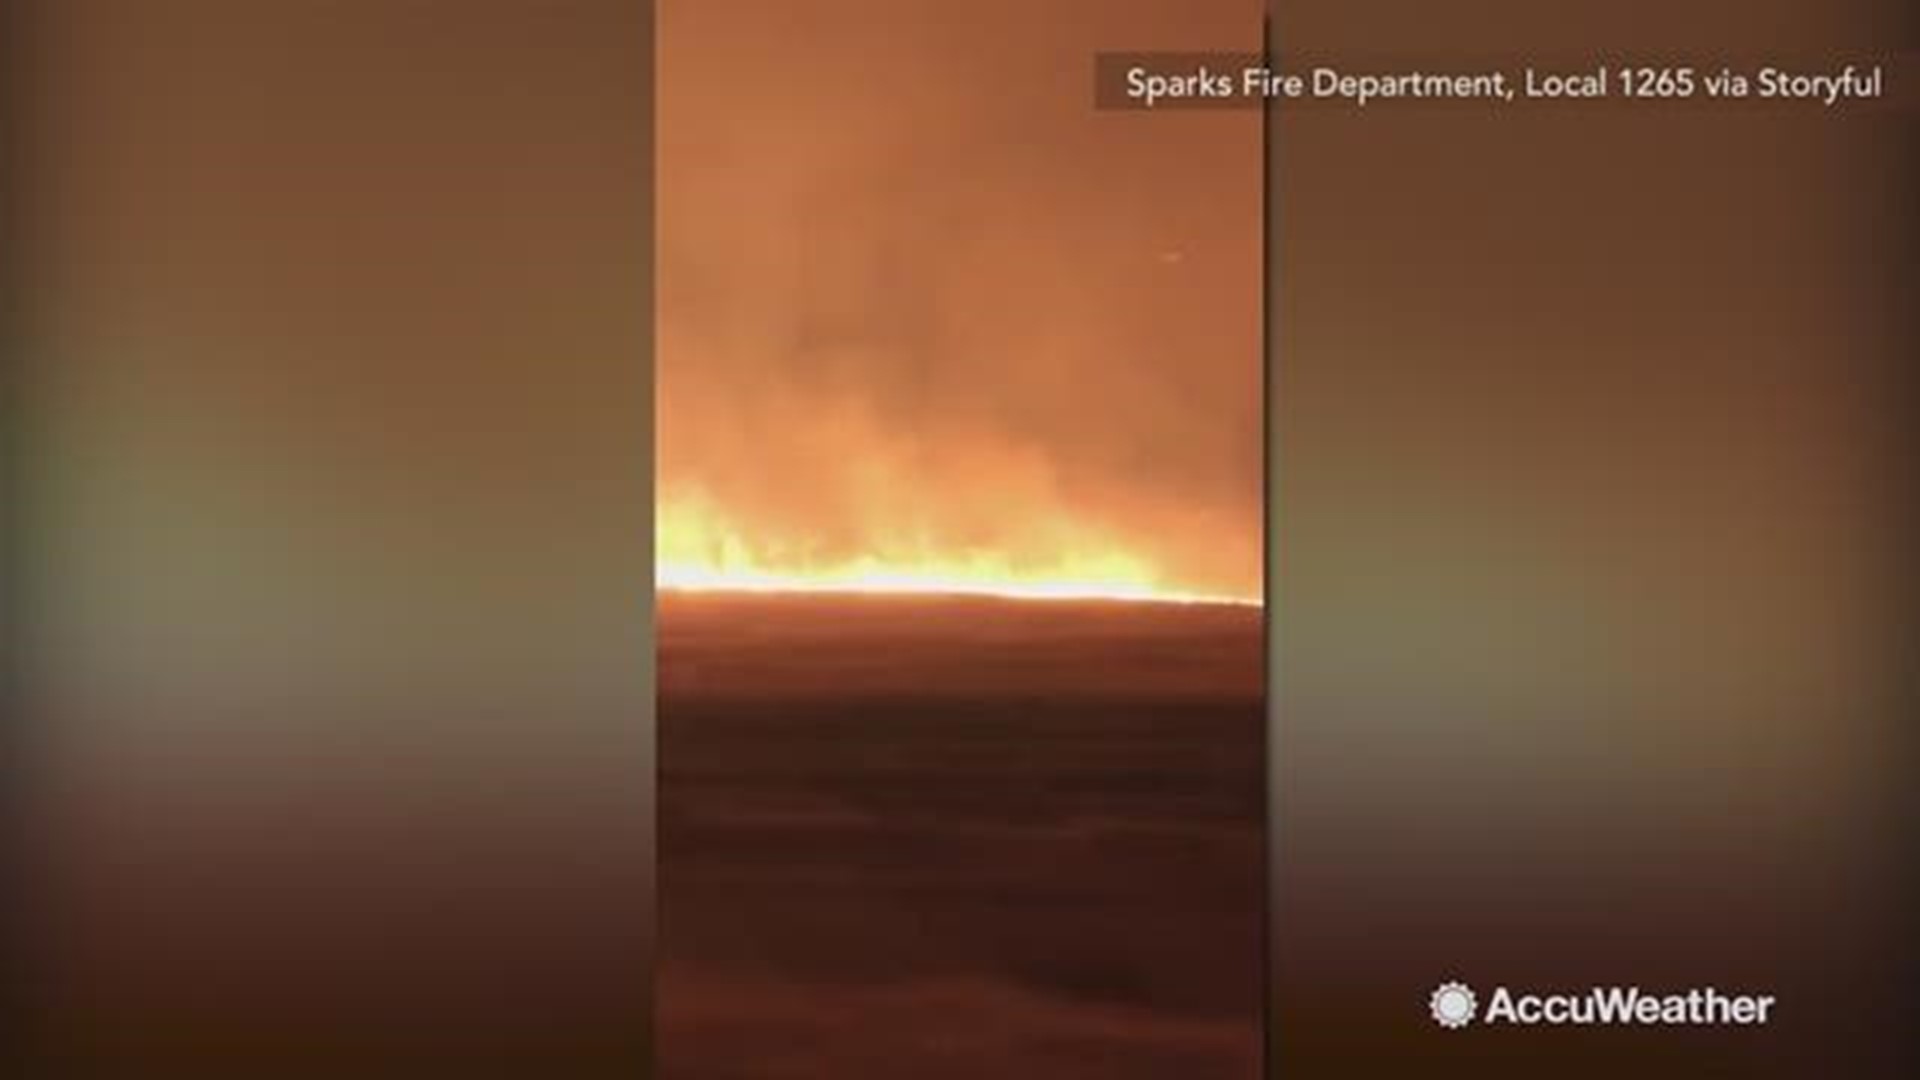 The Camp Fire has burned over 111,000 acres, destroyed more than 6,700 structures and killed 23 people as of right now.  The fire is currently 25 percent contained at last update.  This video shows a massive wall of fire at Butte County on Nov. 10.